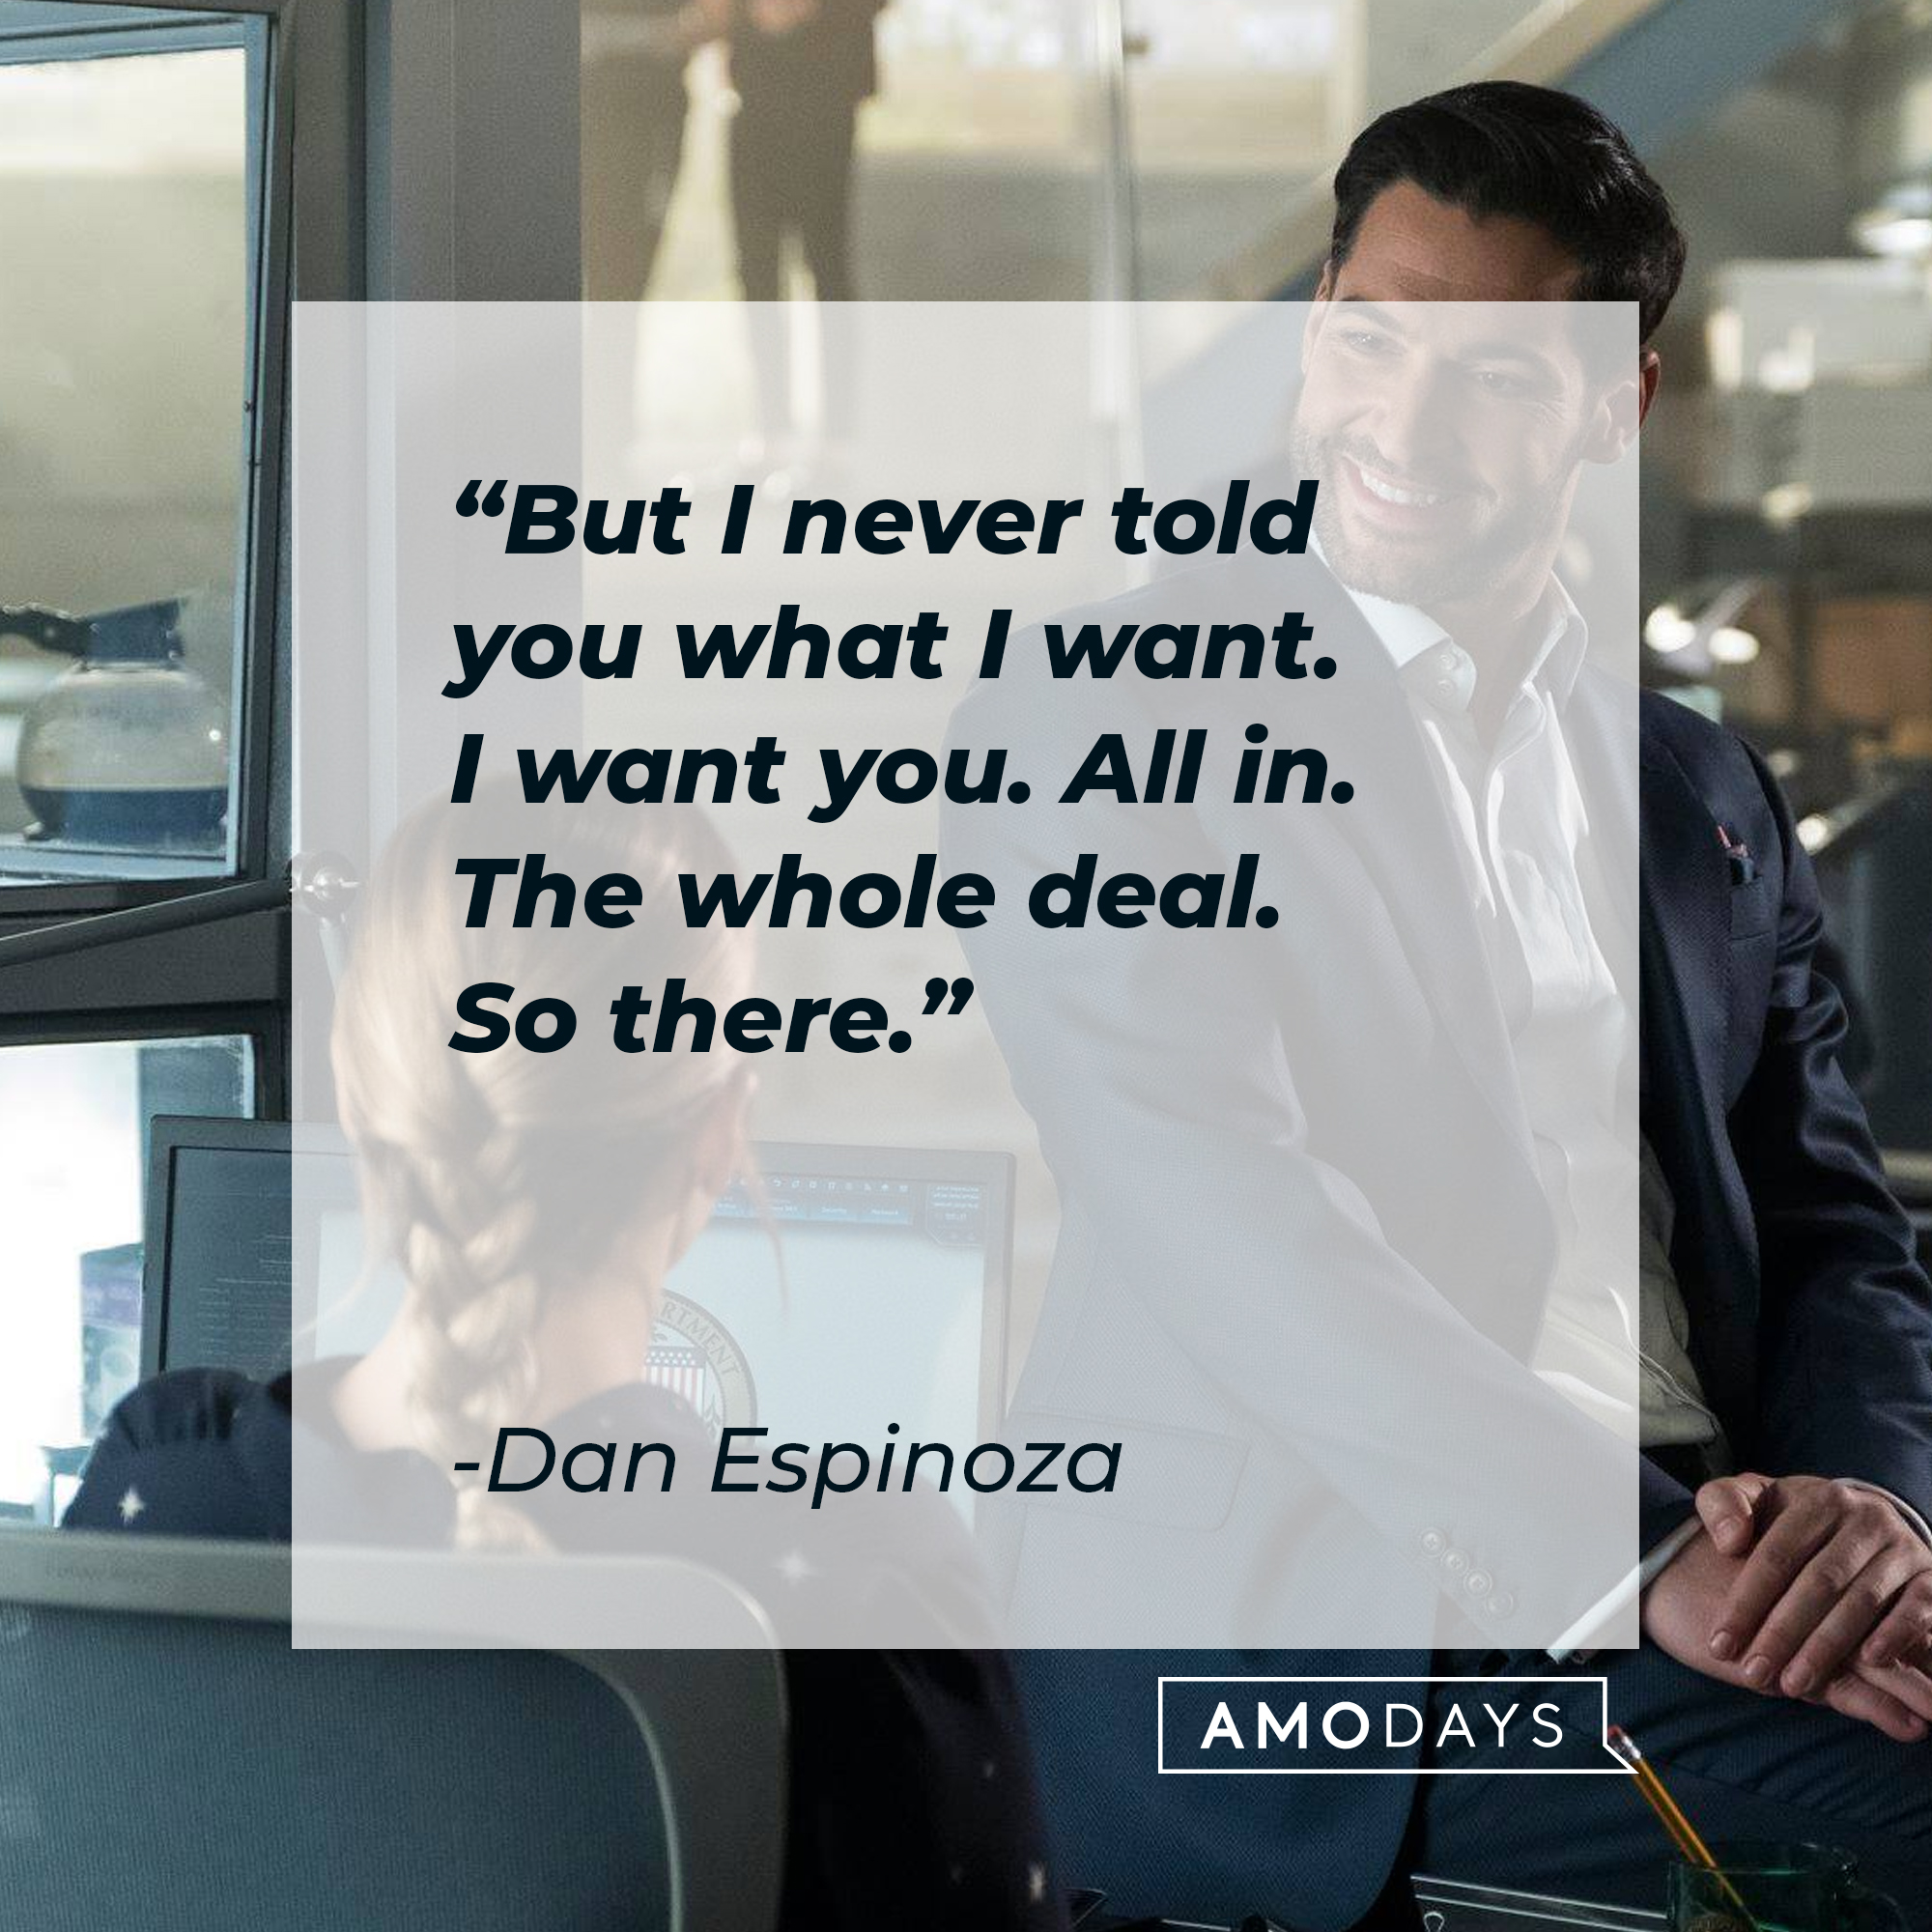 Dan Espinoza’s quote: "But I never told you what I want. I want you. All in. The whole deal. So there." | Source: Facebook.com/LuciferNetflix